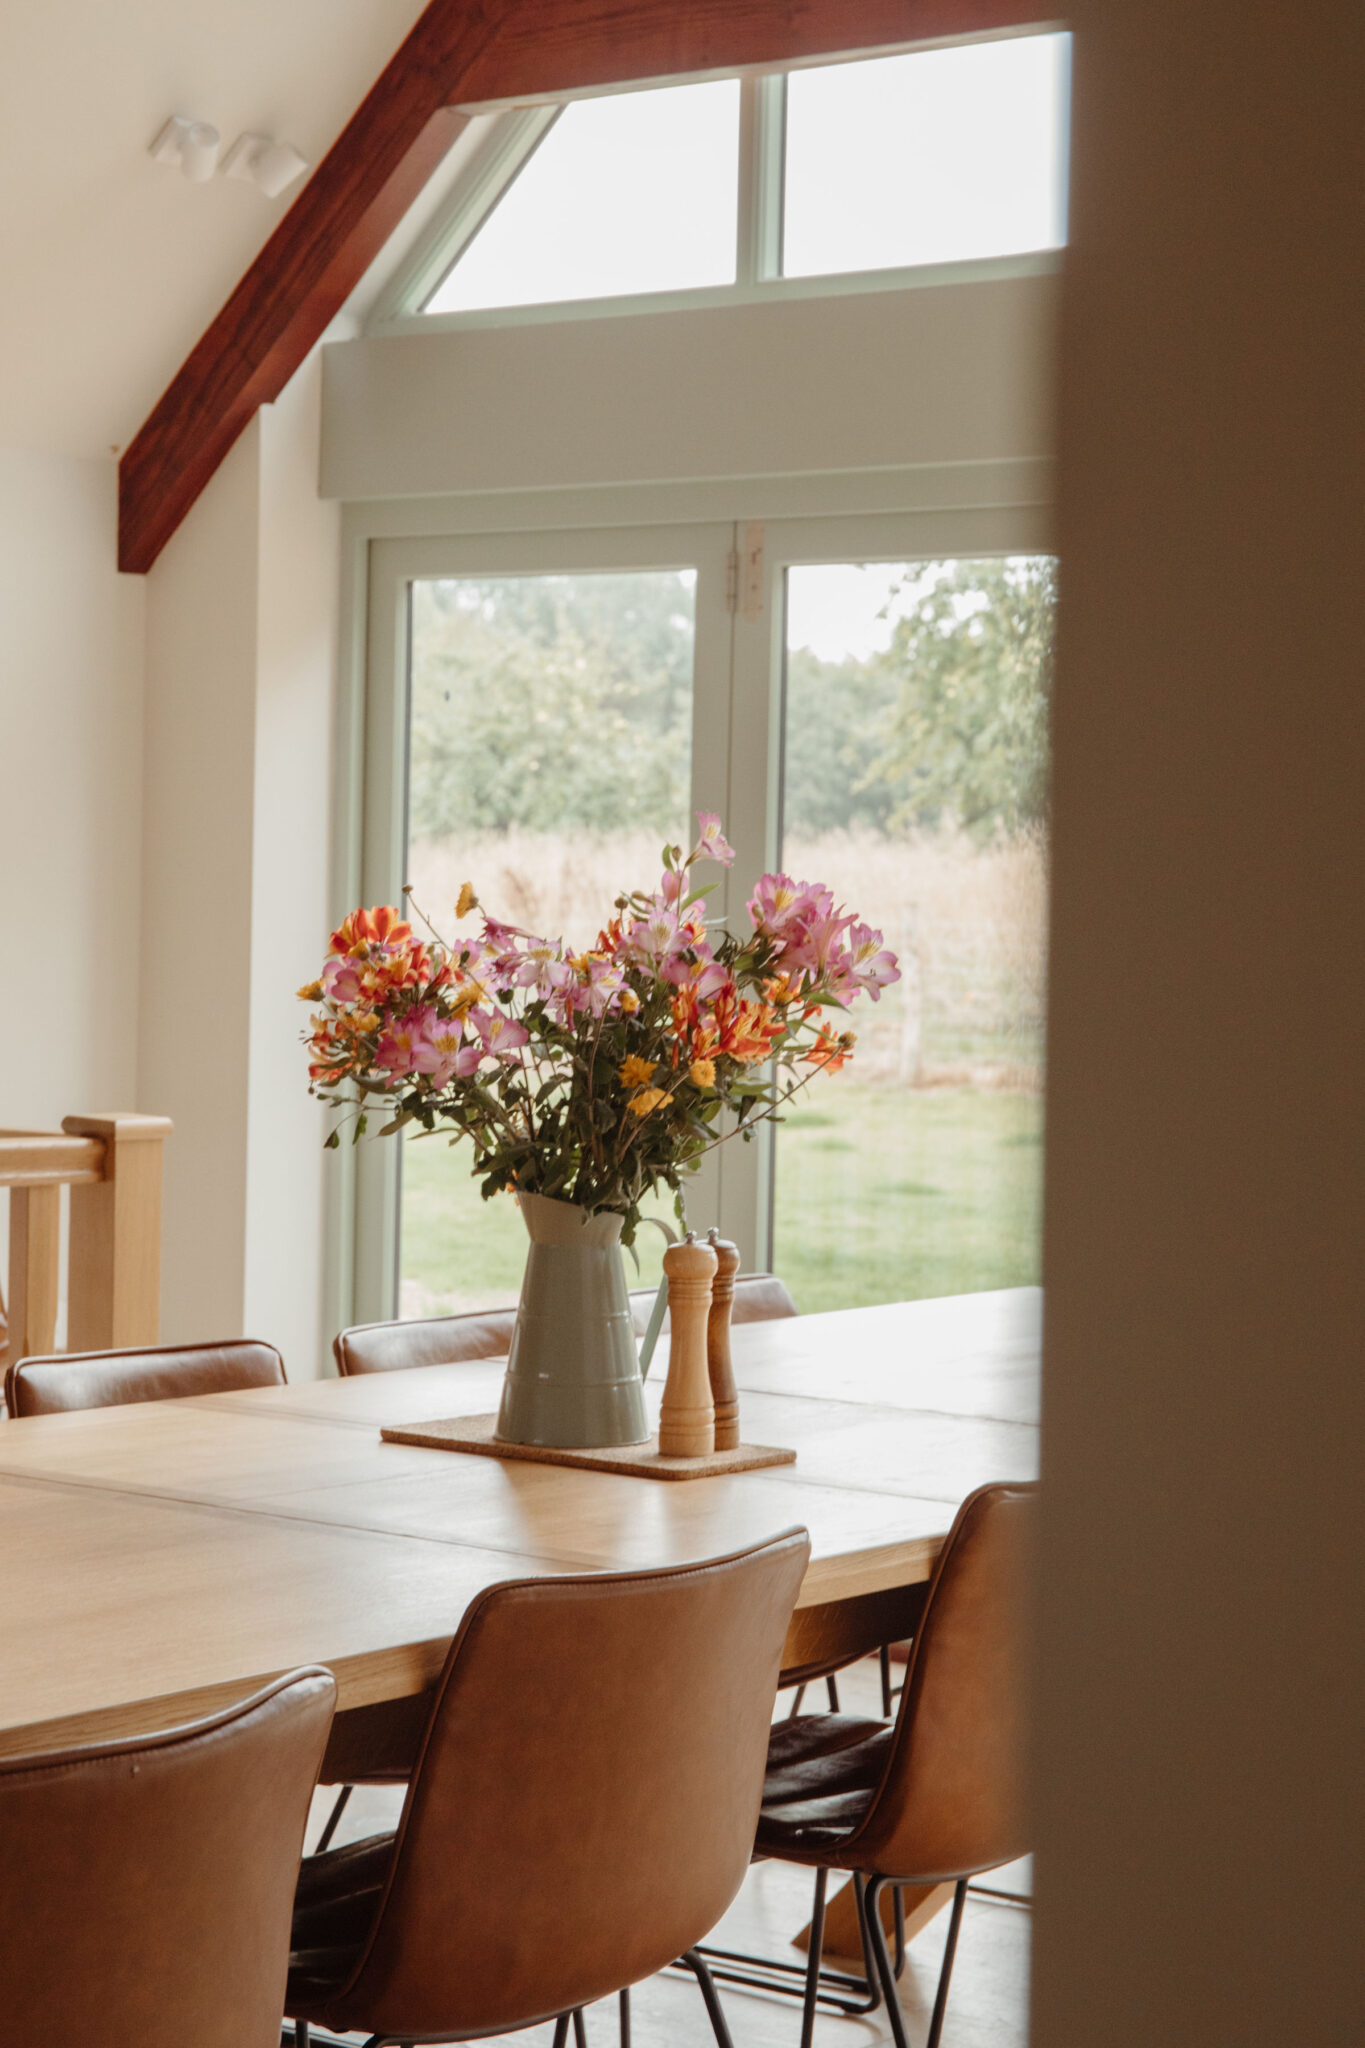 Wild flowers in a green vase on a dining table